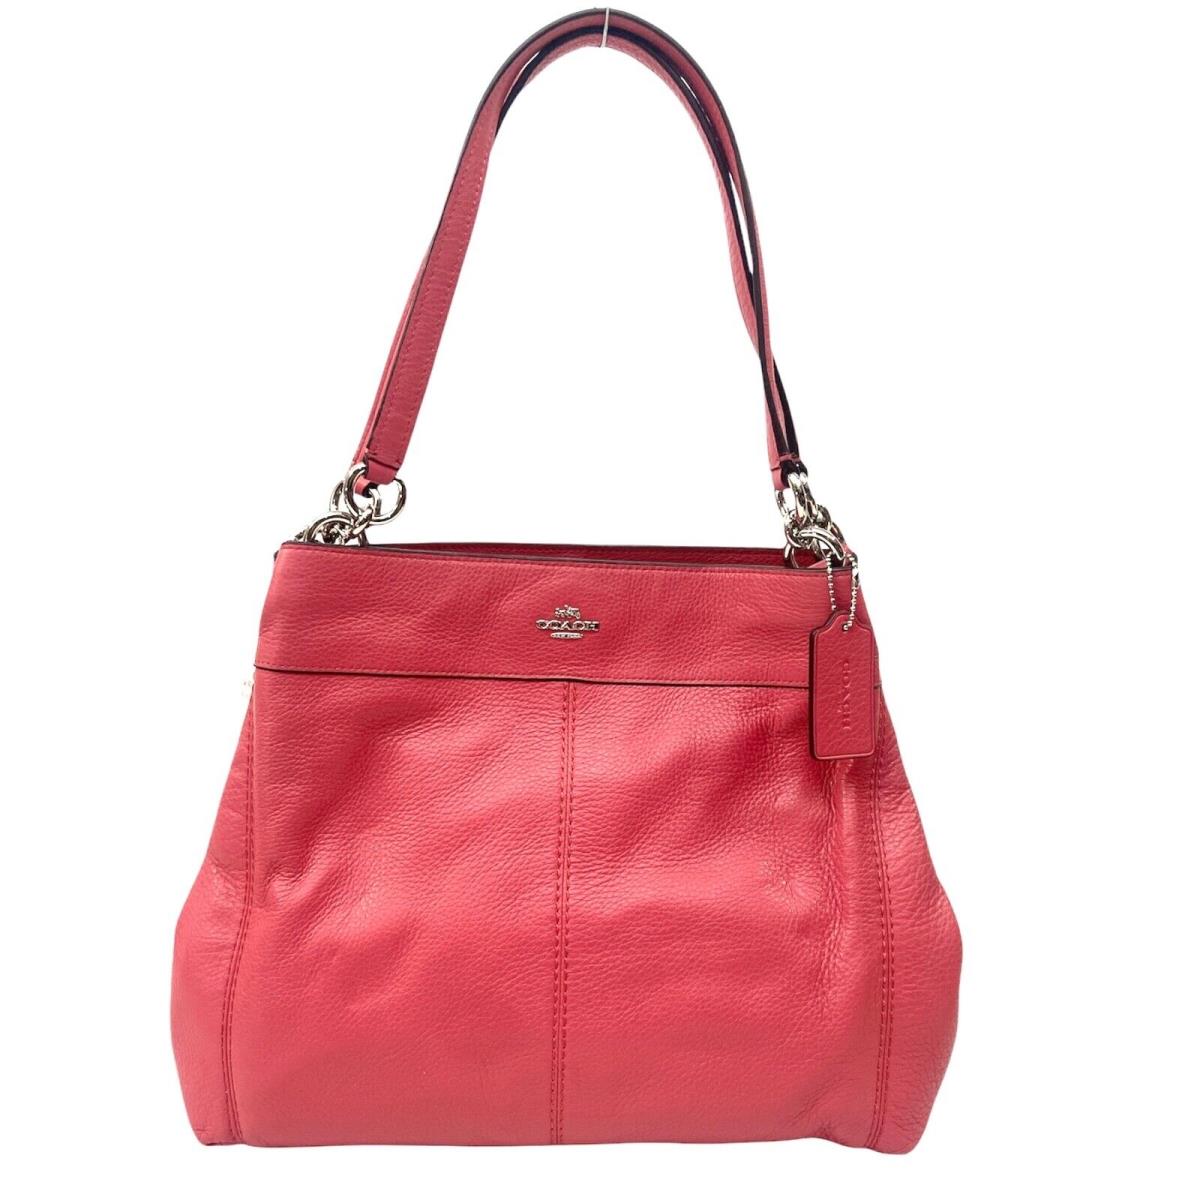 Coach Pebble Leather Lexy Shoulder Bag Strawberry